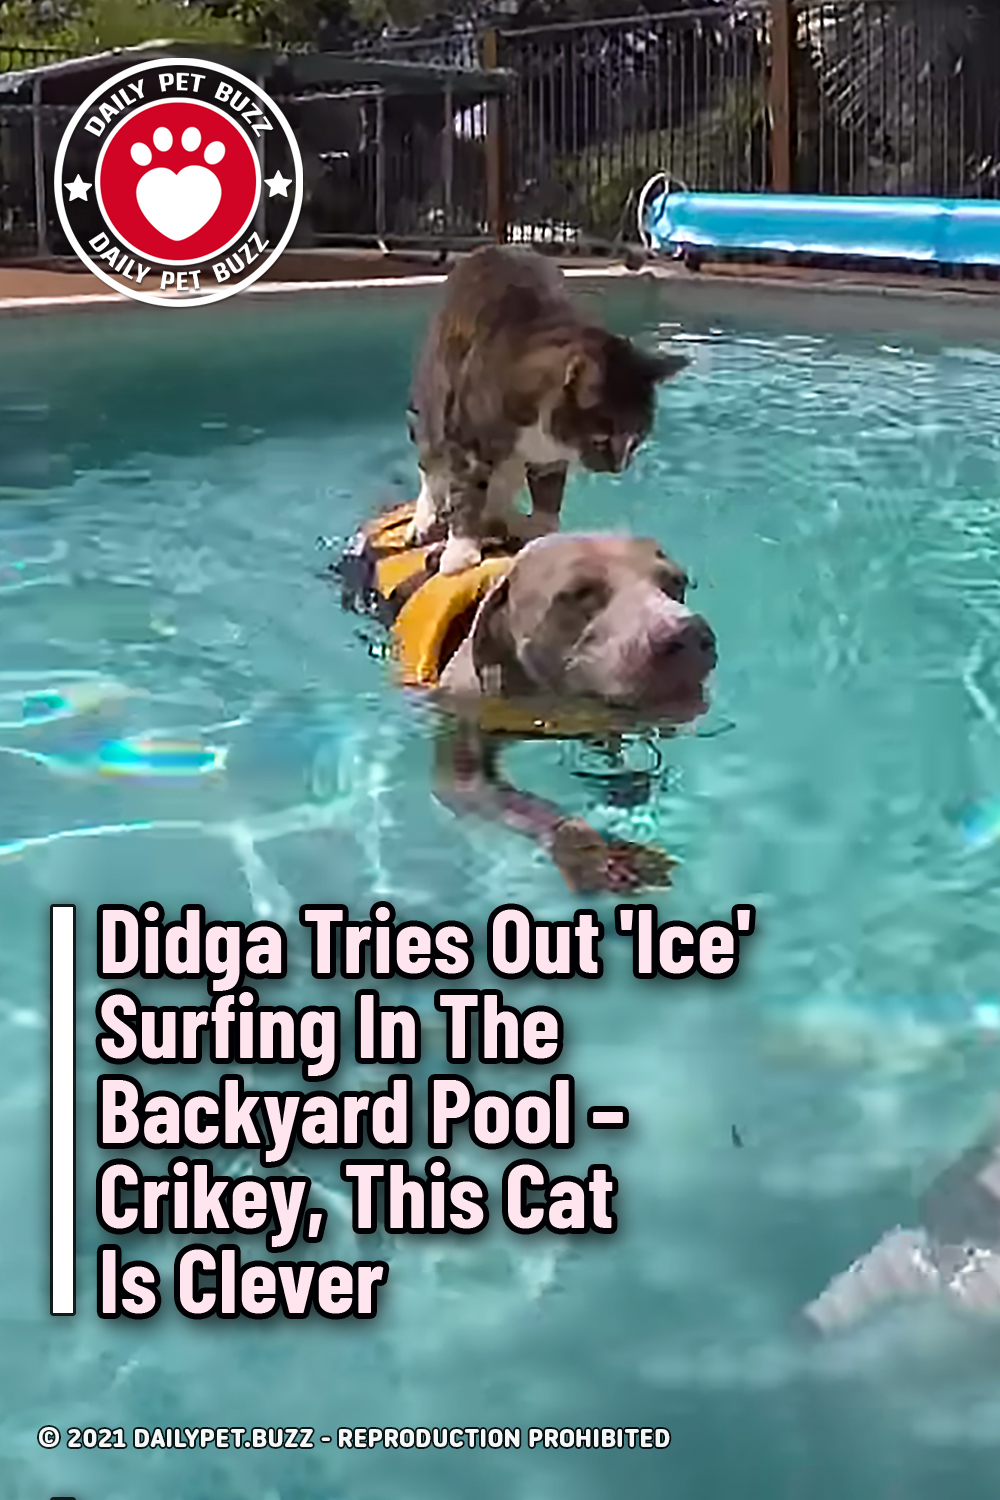 Didga Tries Out \'Ice\' Surfing In The Backyard Pool – Crikey, This Cat Is Clever